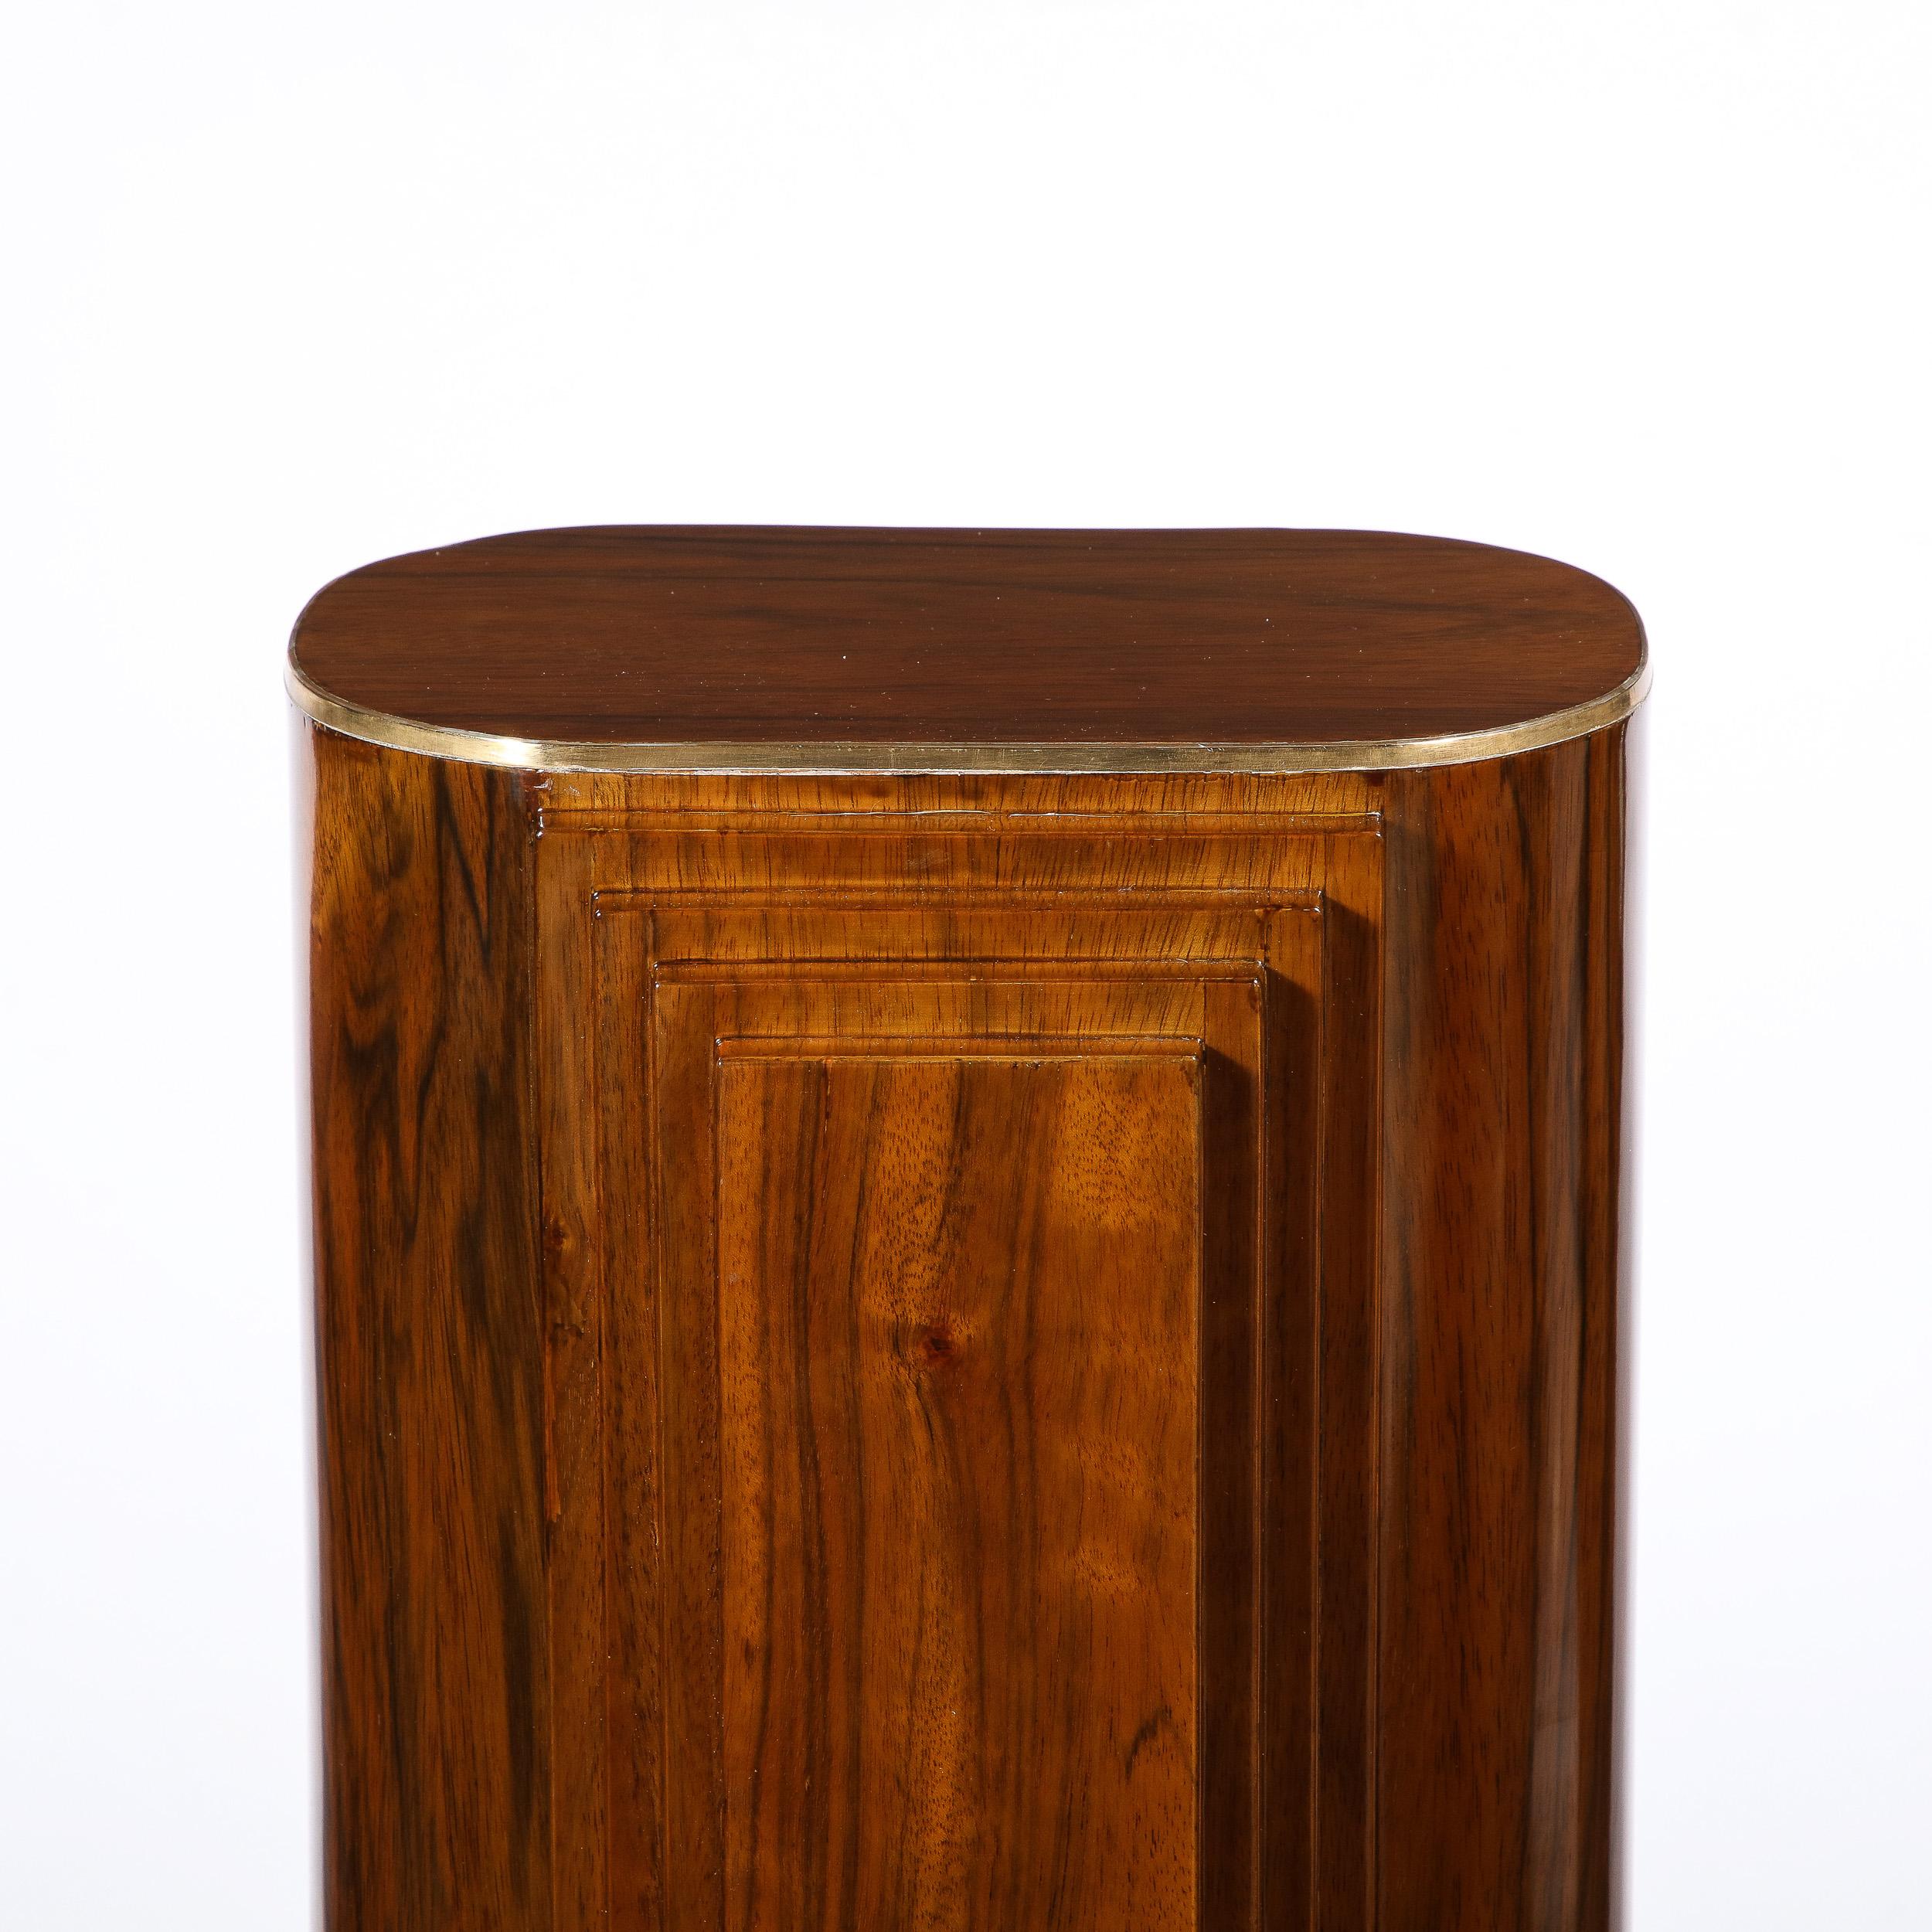 Art Deco Skyscraper Hand-rubbed Book-matched Walnut Pedestal w/ Brass Inlays For Sale 3